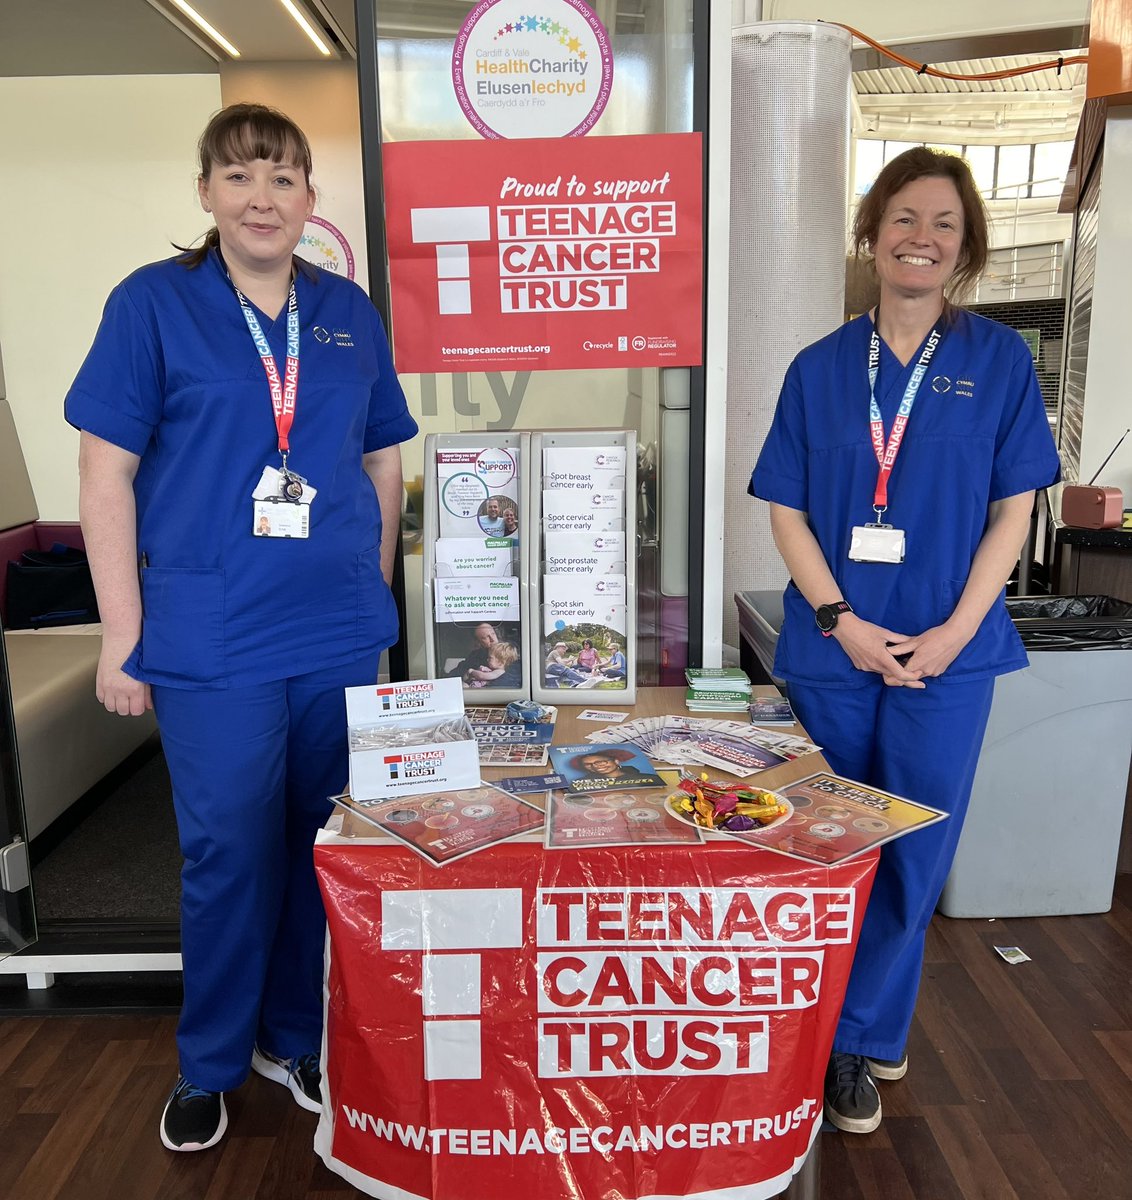 It’s TYA Cancer Awareness month & our fantastic @TeenageCancer CNS Team for SE Wales are in UHW concourse, raising awareness about how we can help, come and say hi 👋 @CV_UHB #TYACancer